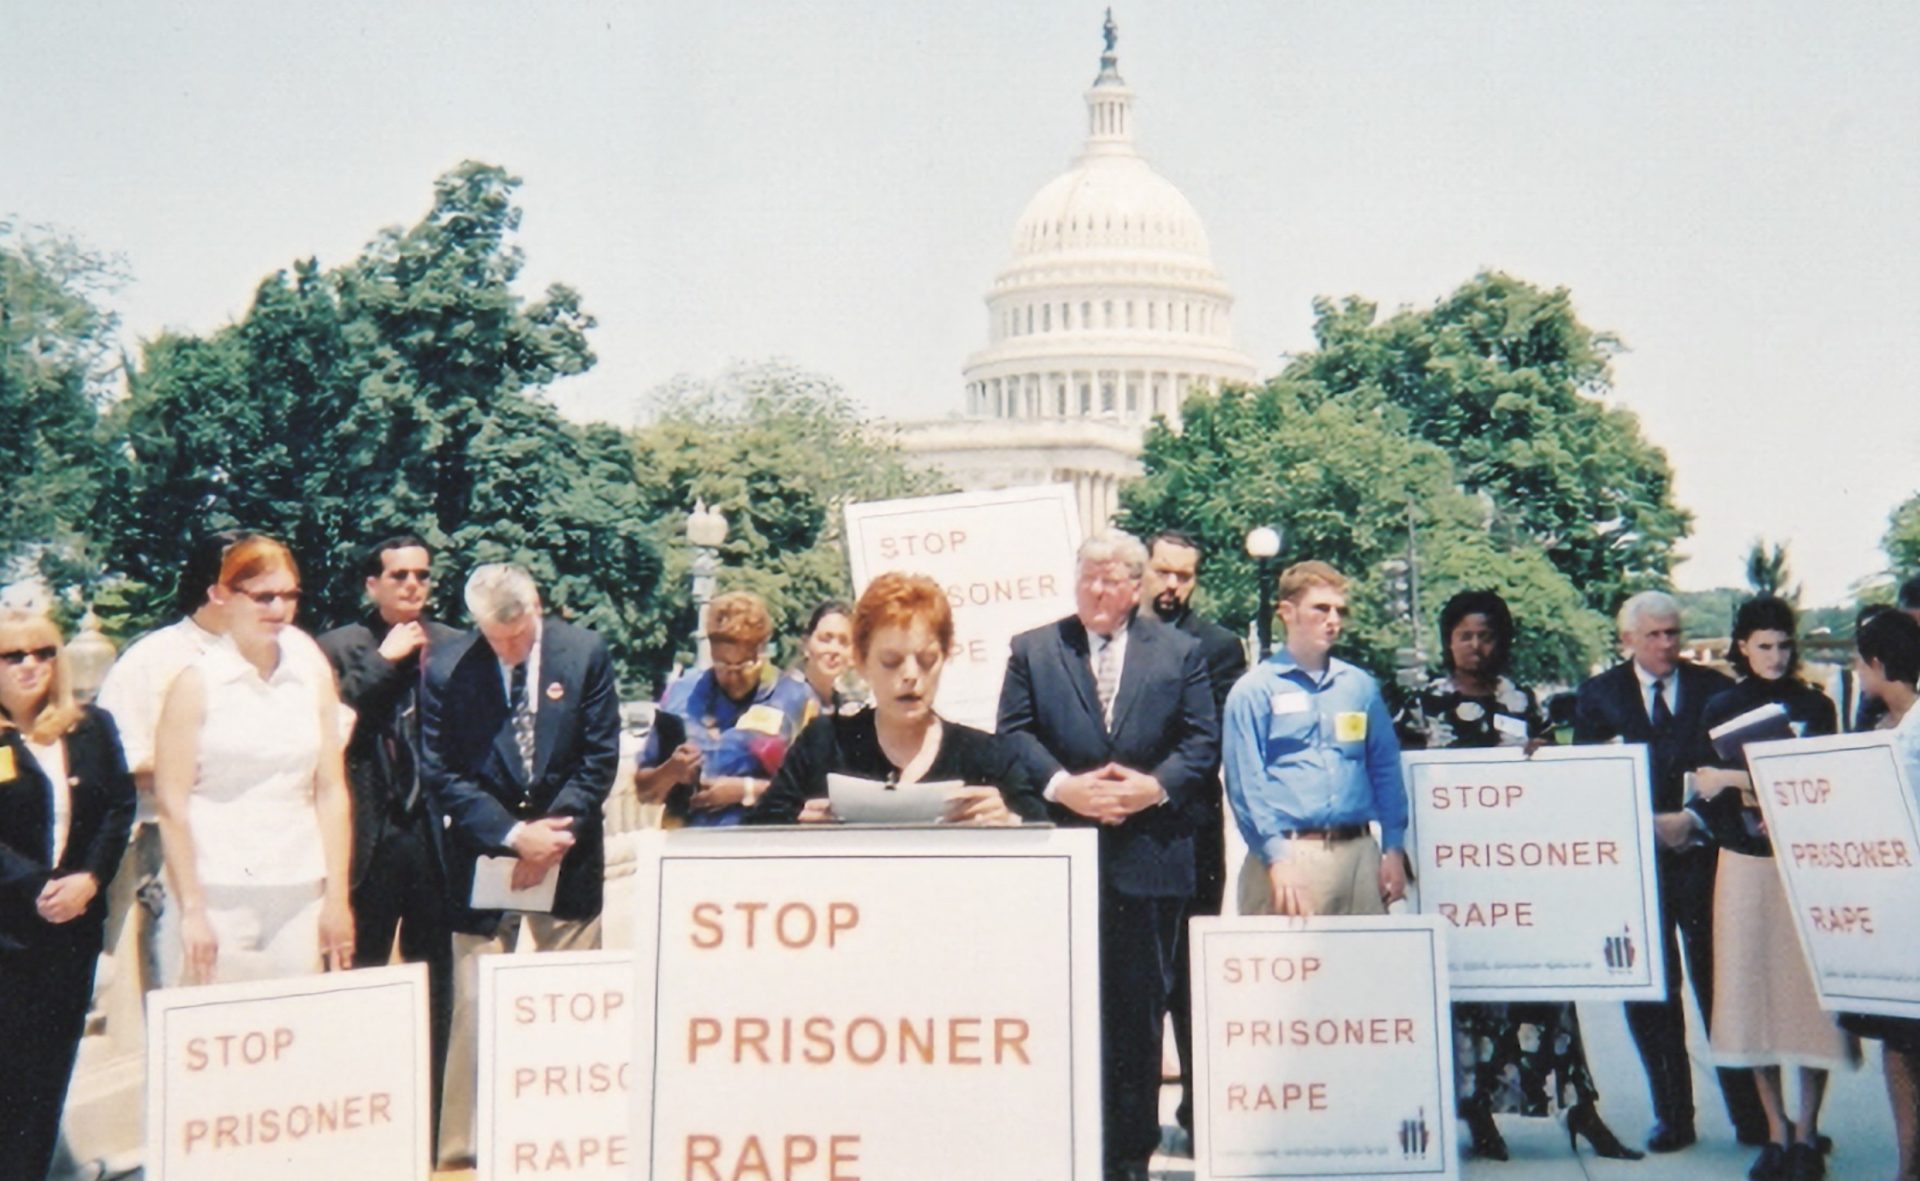 Rally against sexual violence in prison in front of the U.S. Capitol building.